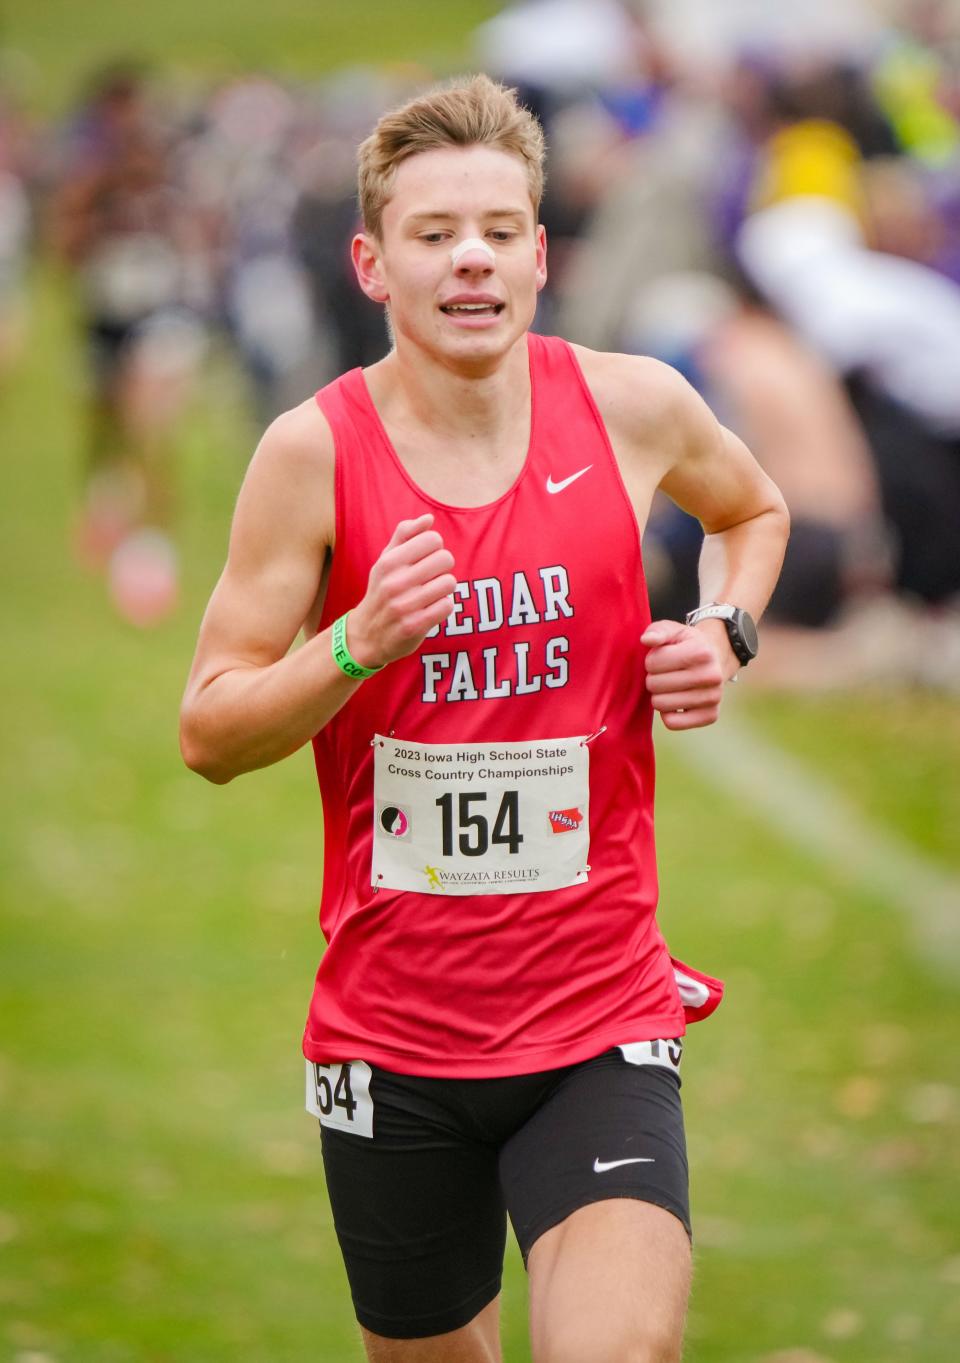 Jaden Merrick of Cedar Falls placed second in the 4A boys state cross country race.